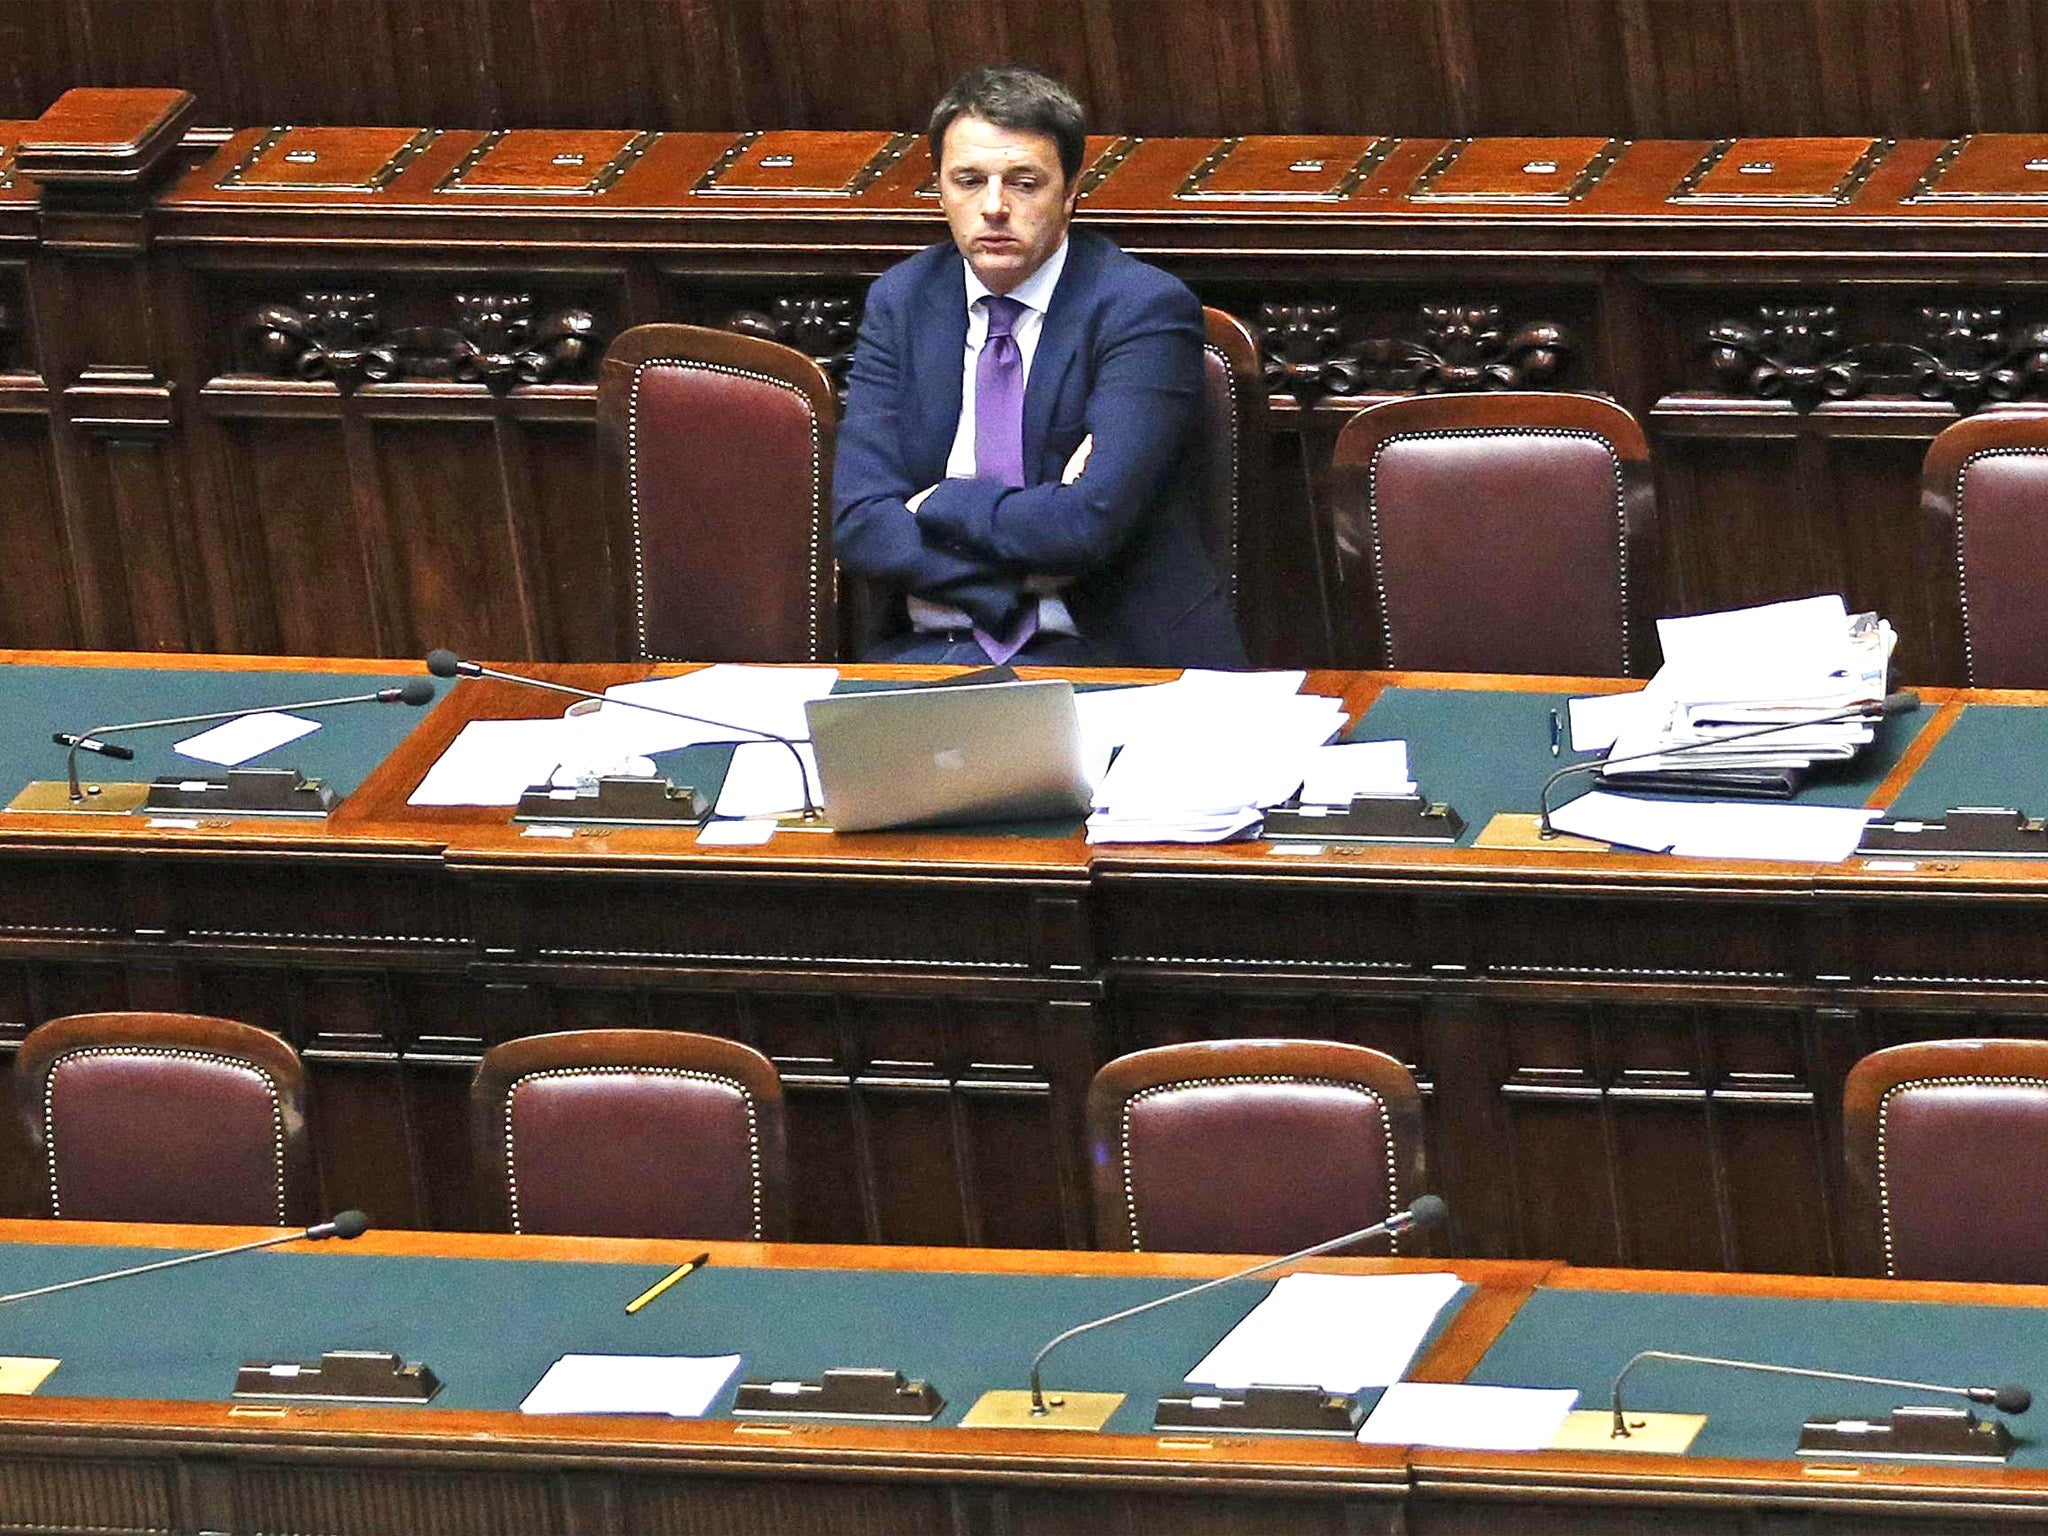 Italy’s Prime Minister Matteo Renzi won a confidence vote in the lower chamber on Tuesday, but his support there was a given; he has to convince sceptical senators and the country at large